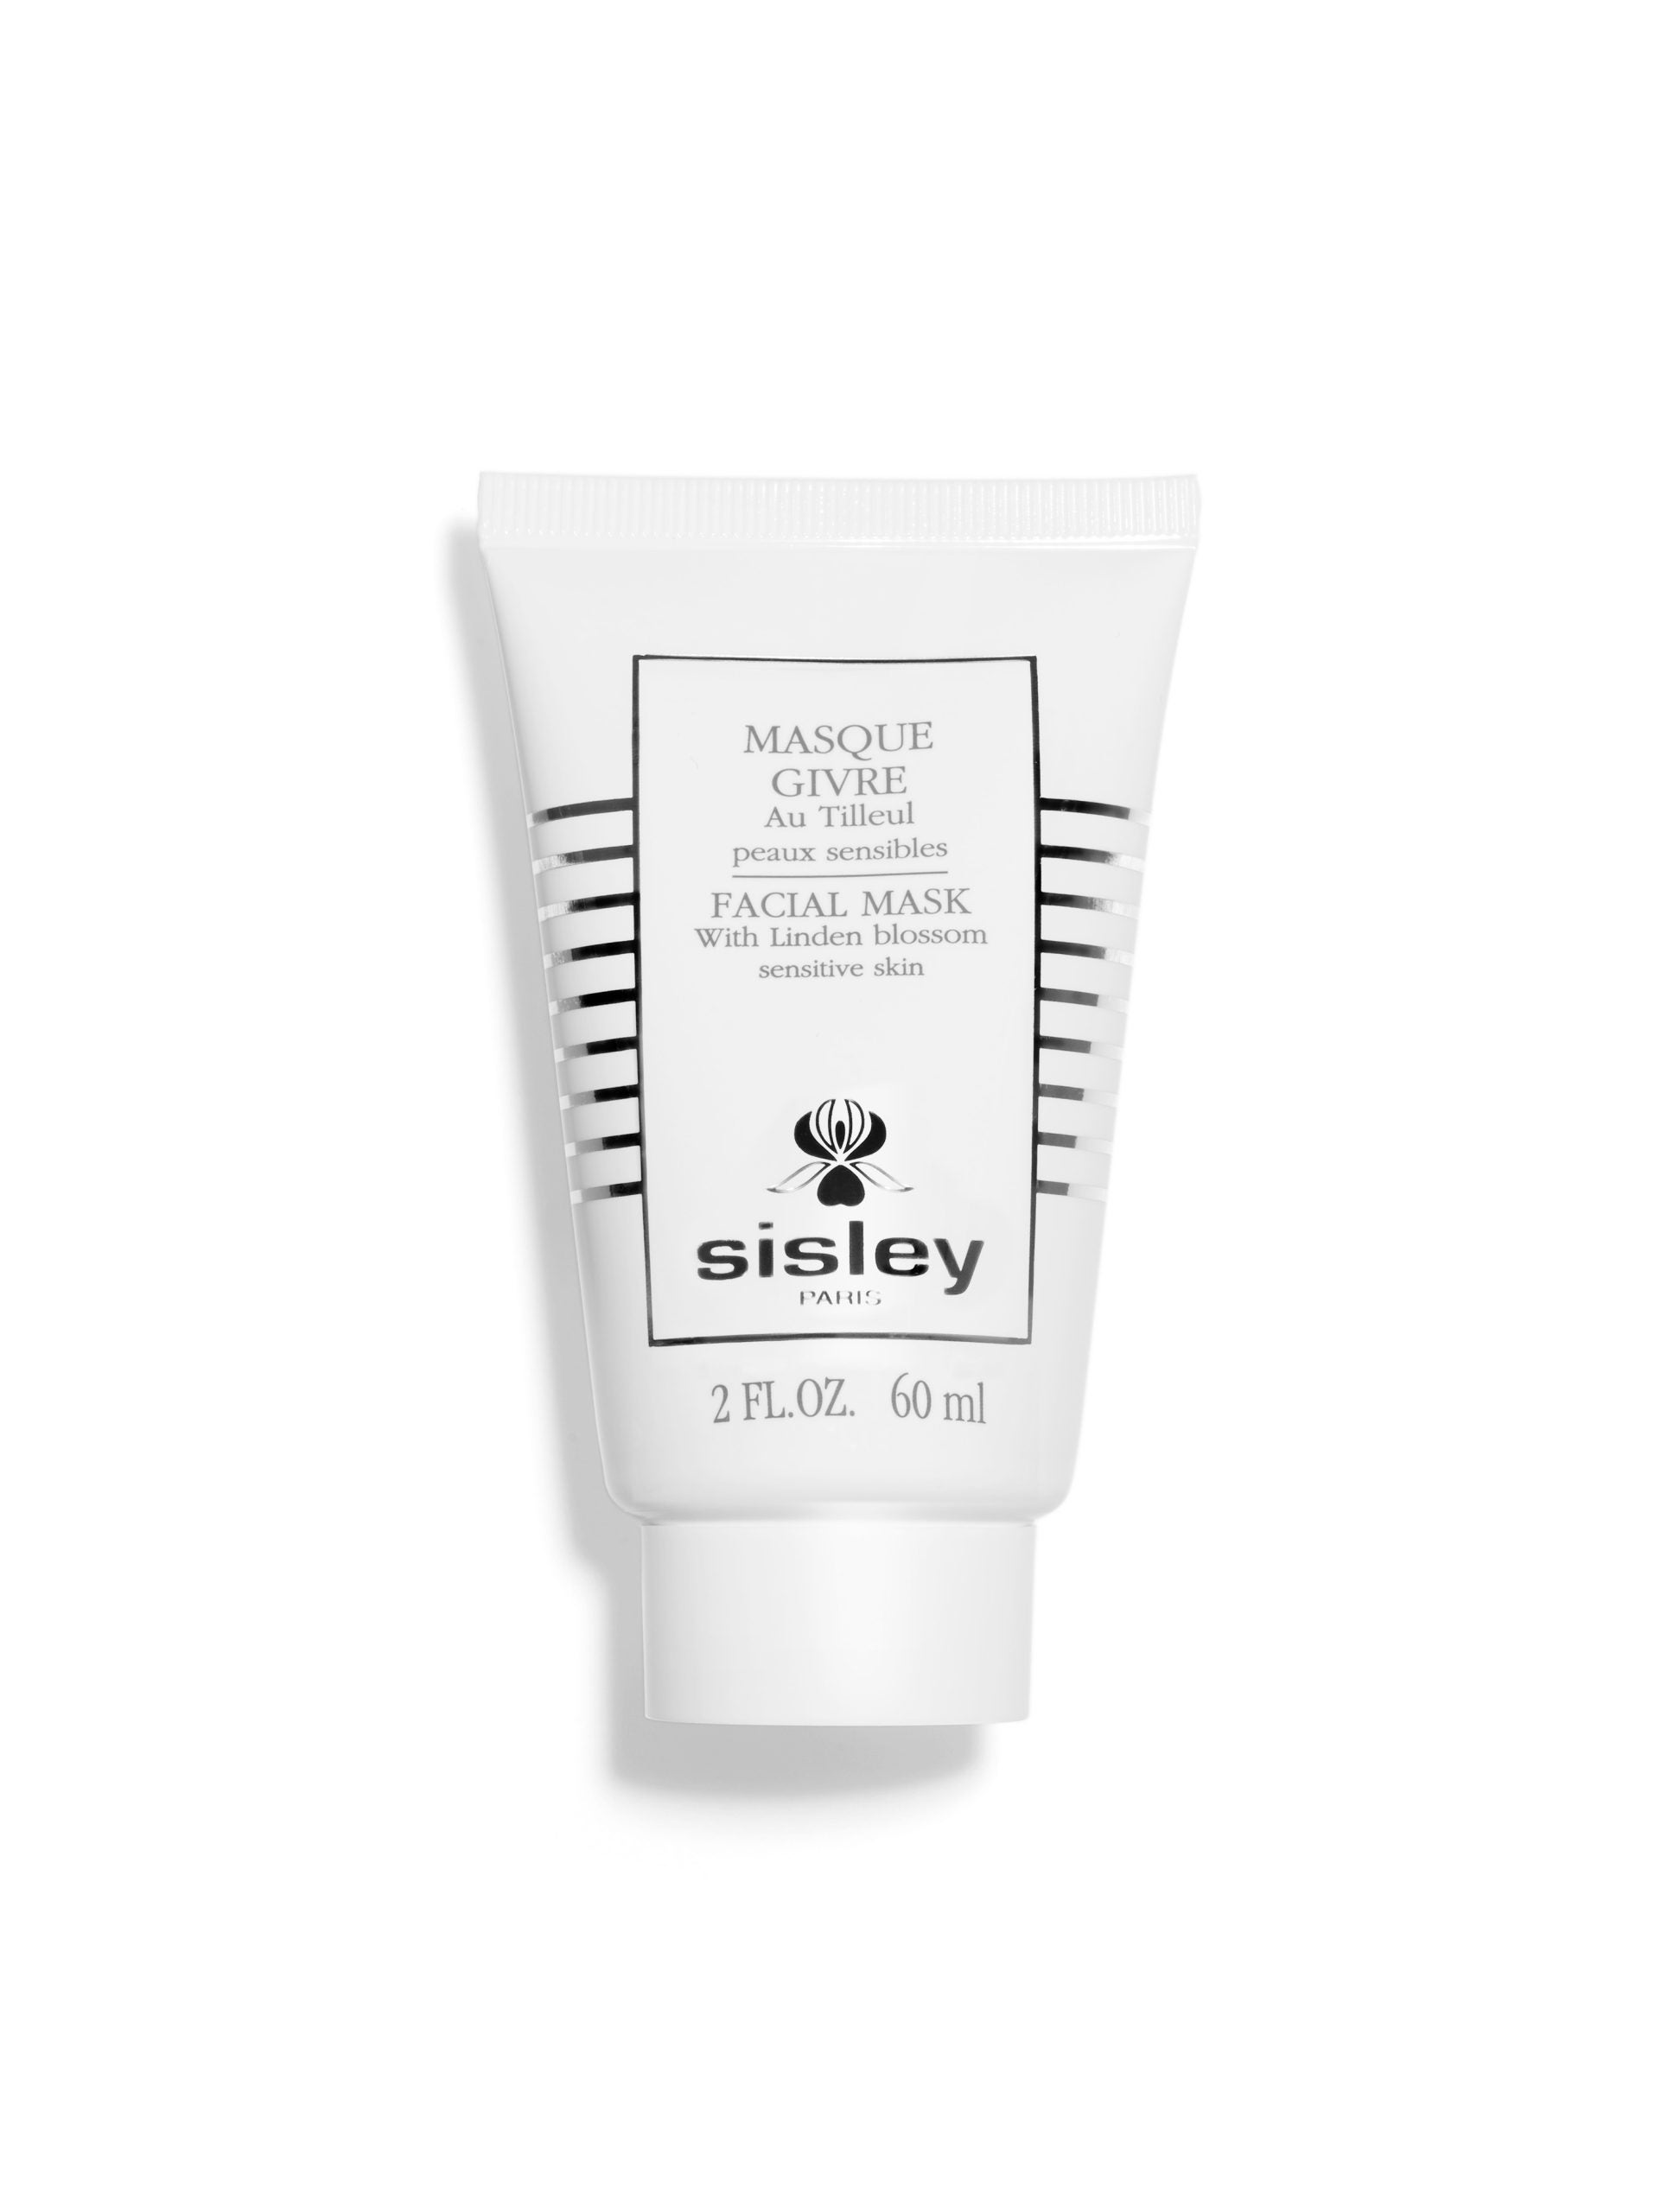 These Sisley Paris Face Masks Actually Work And Smell Amazing